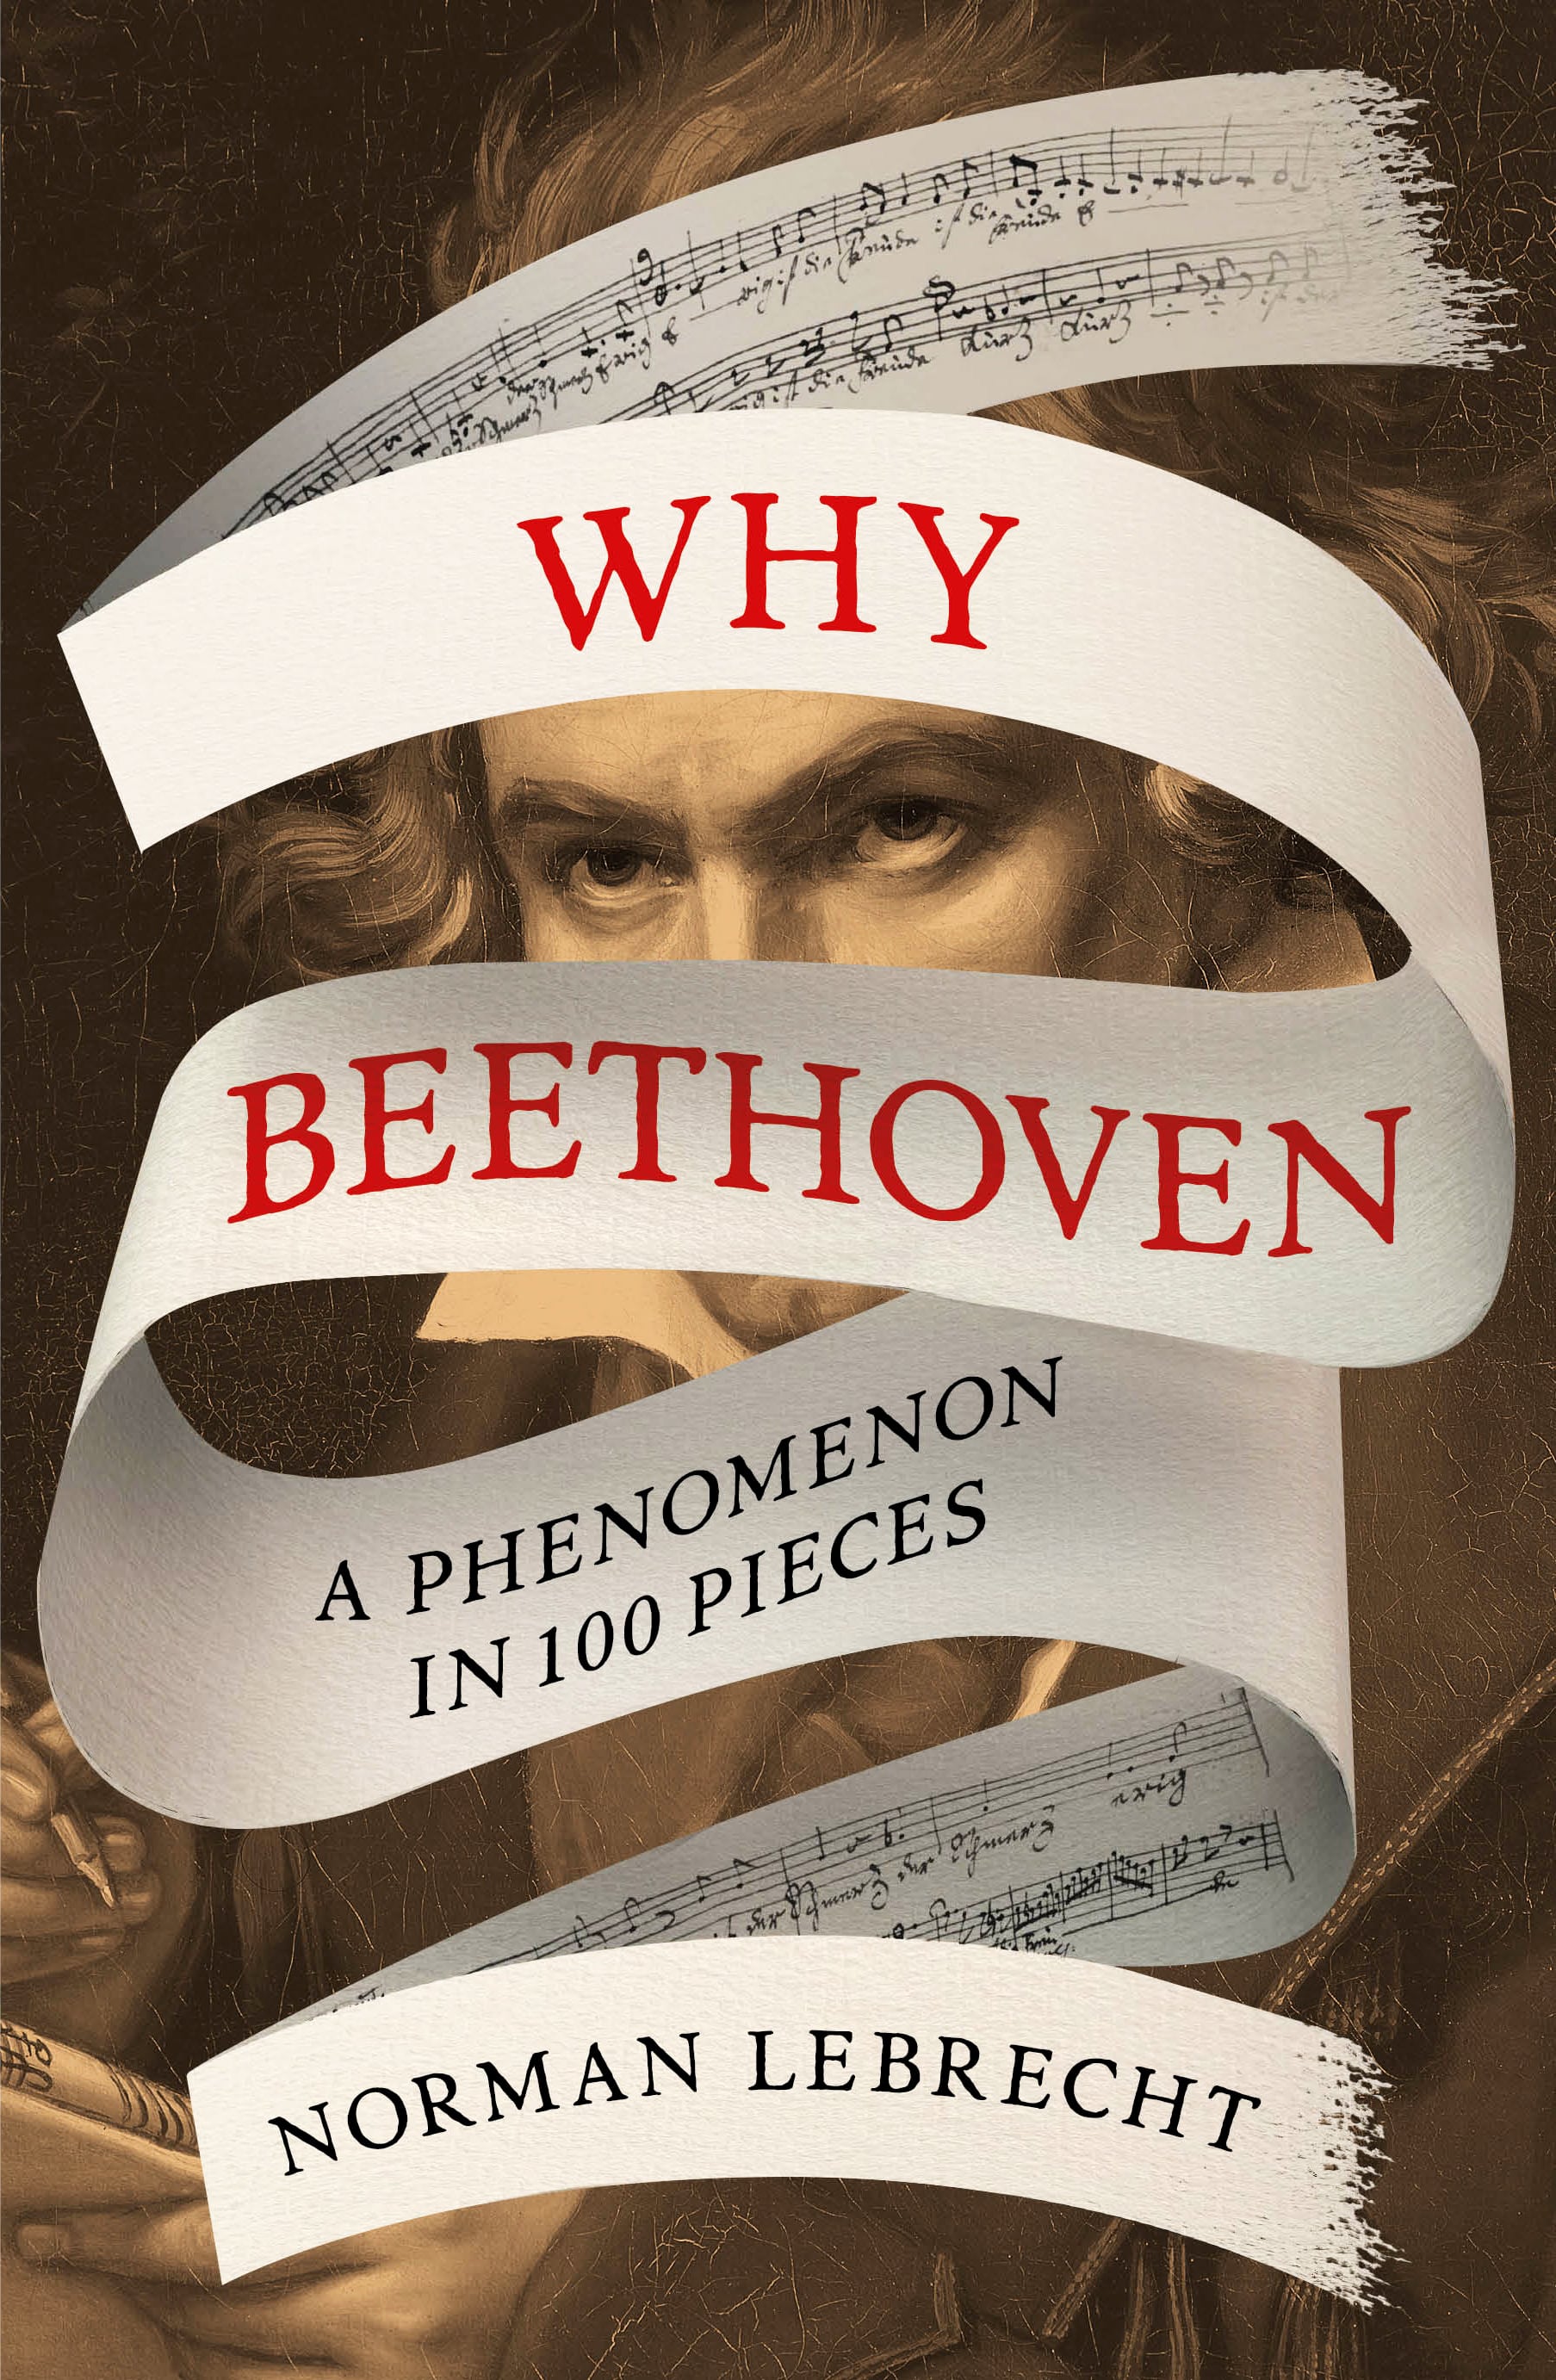 Four things that Beethoven never did